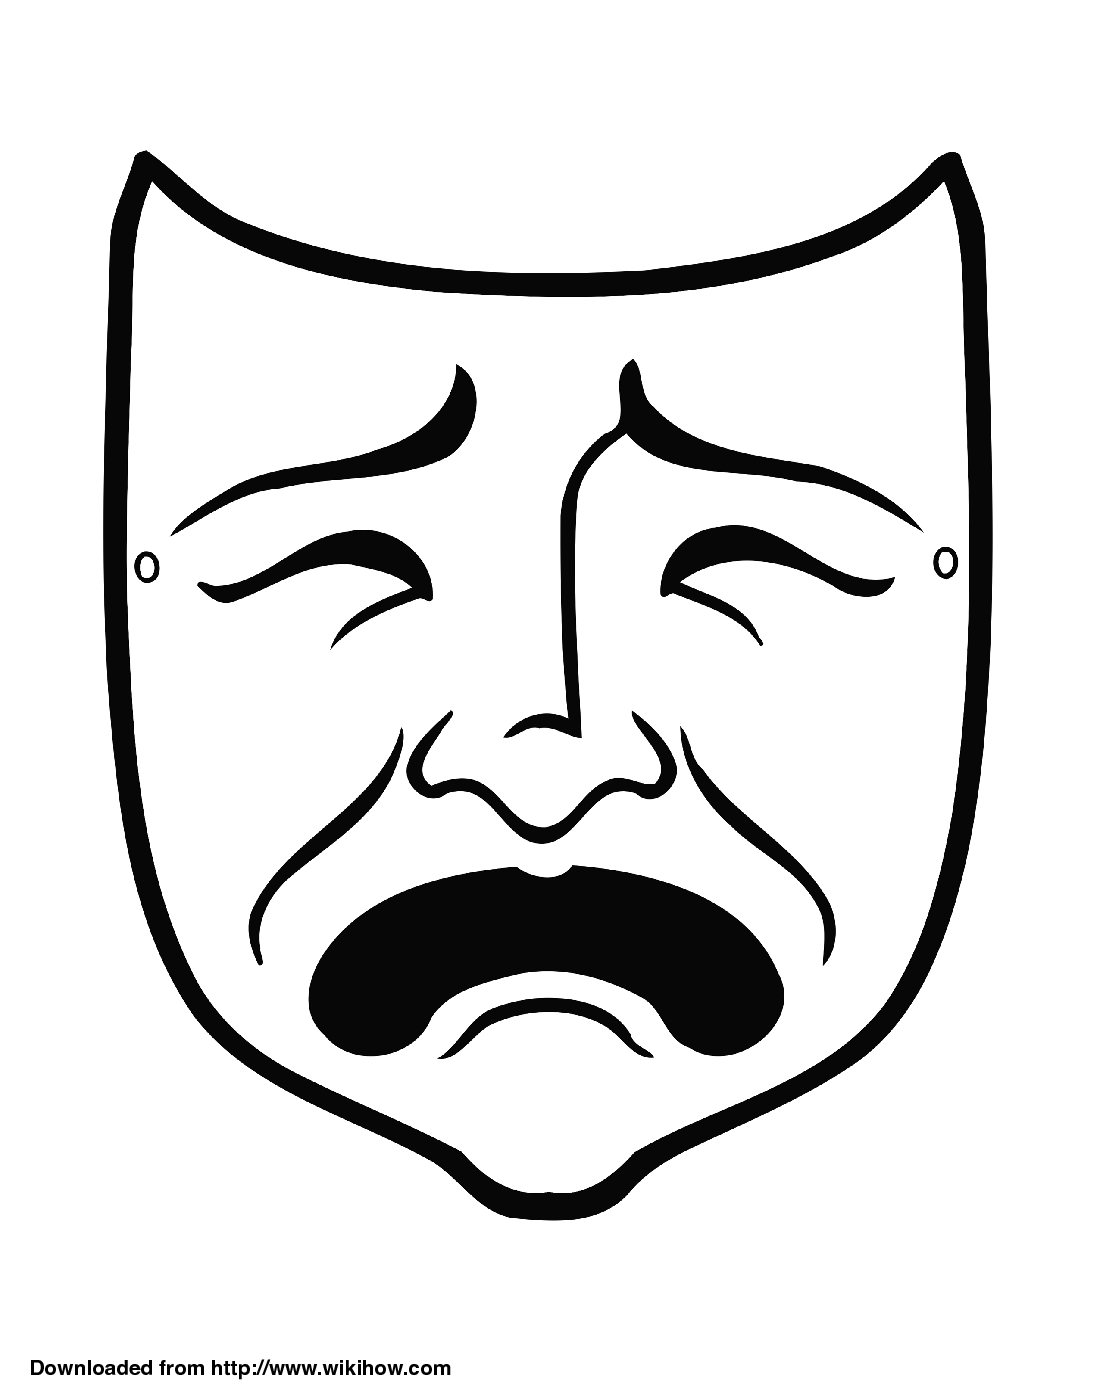 How to Make a Tragedy and Comedy Mask Out of Paper: 5 Steps